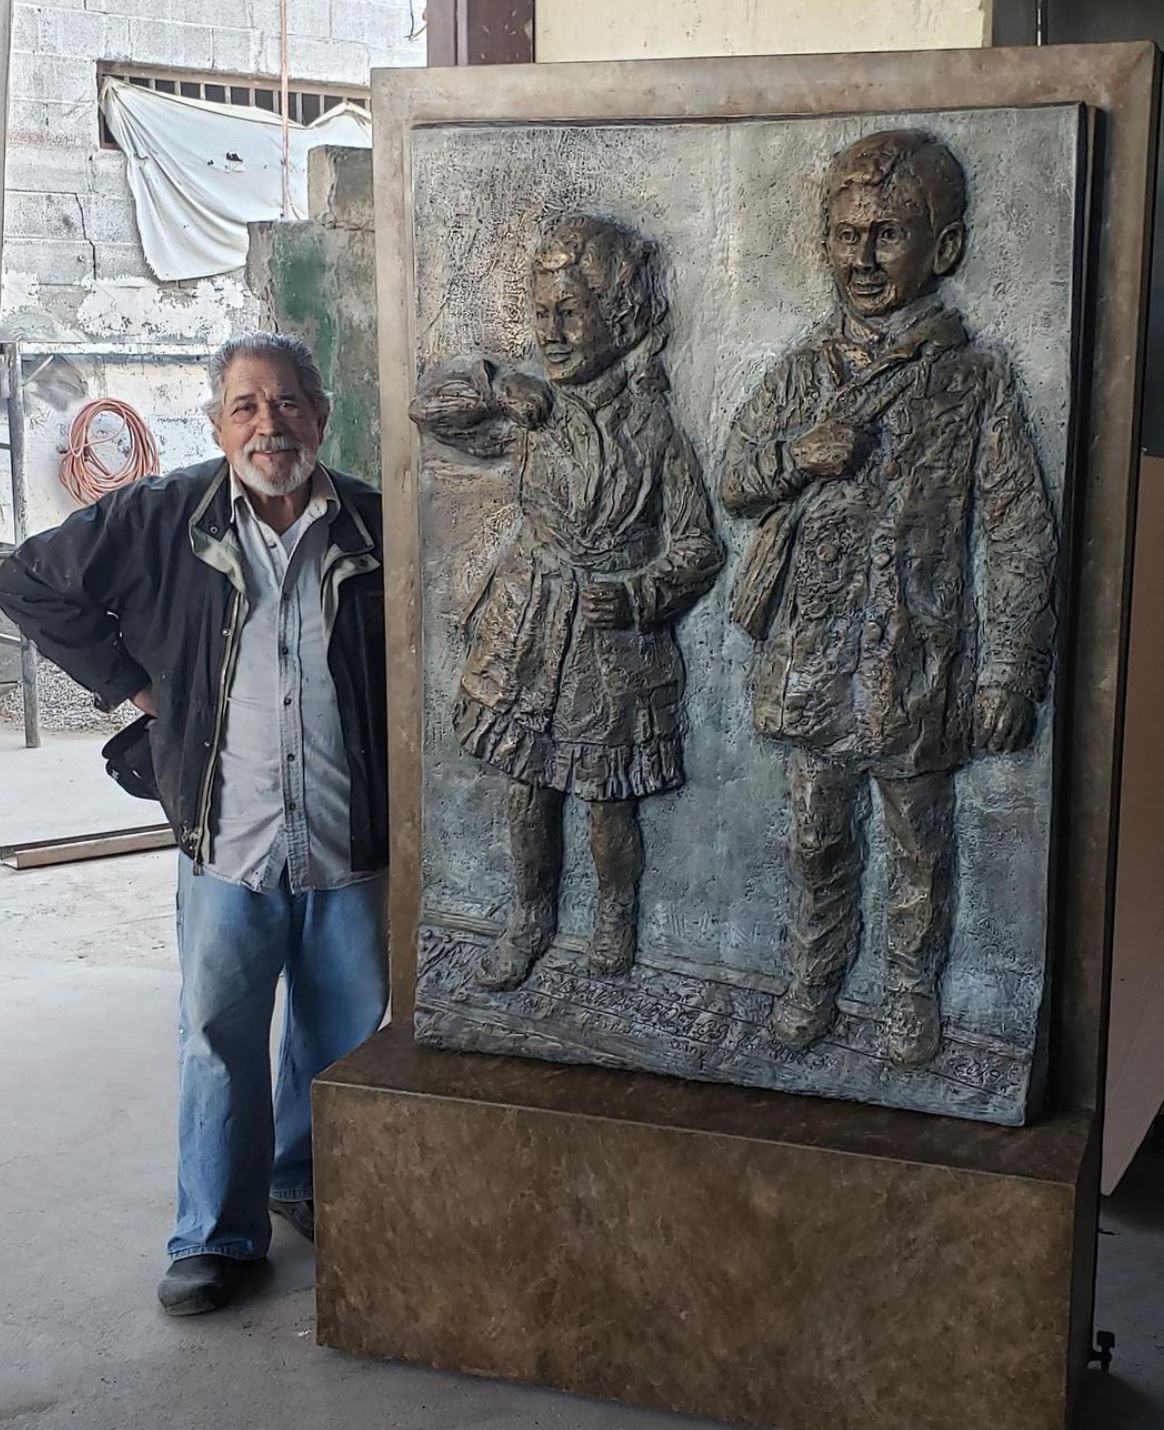 Artist Sonny Rivera with the Maestas sculpture. The sculpture shows two youths, on their way to school, dressed in the clothes of the time period.